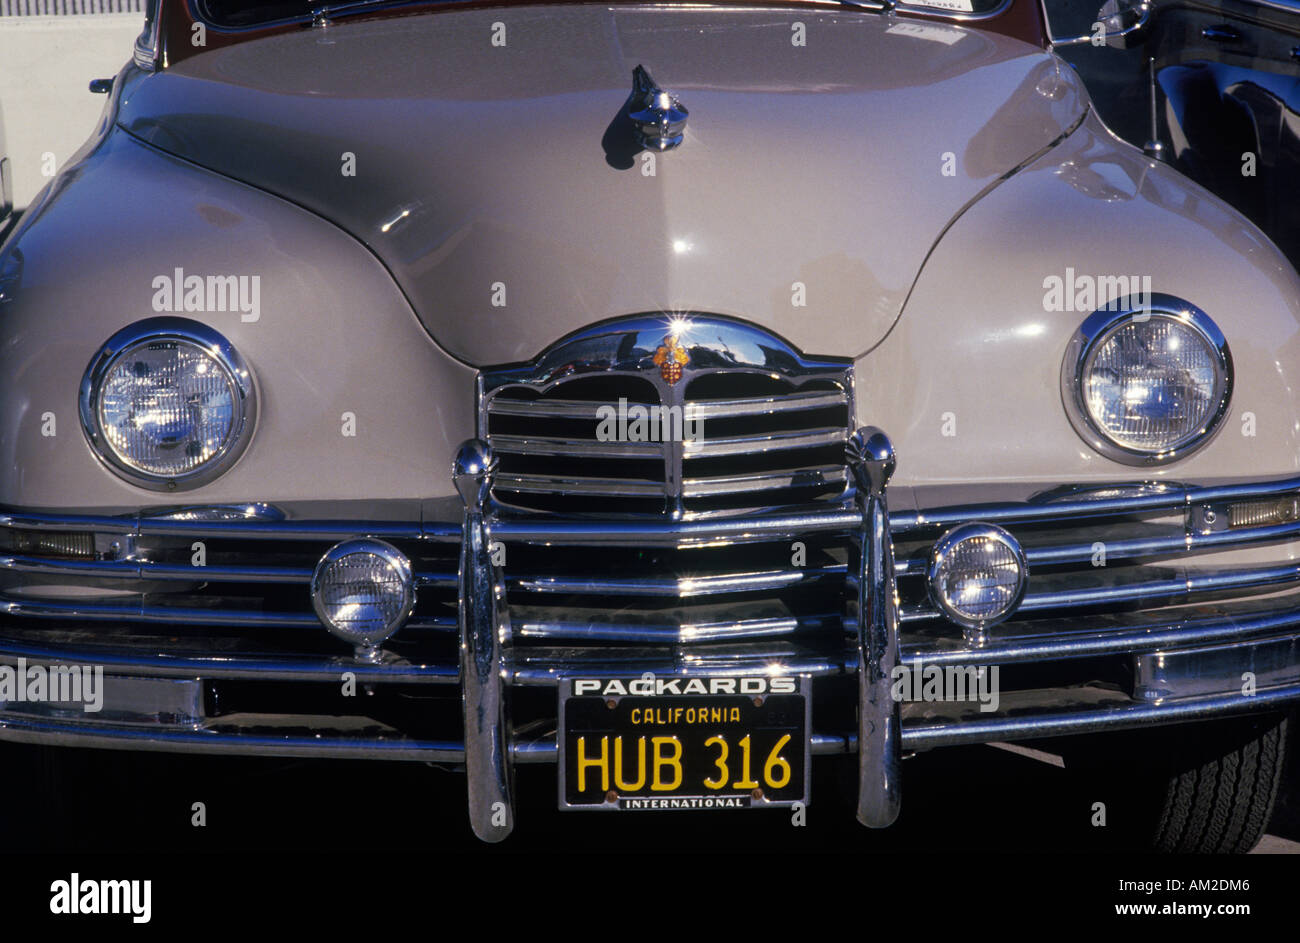 An antique Packard in Hollywood California Stock Photo